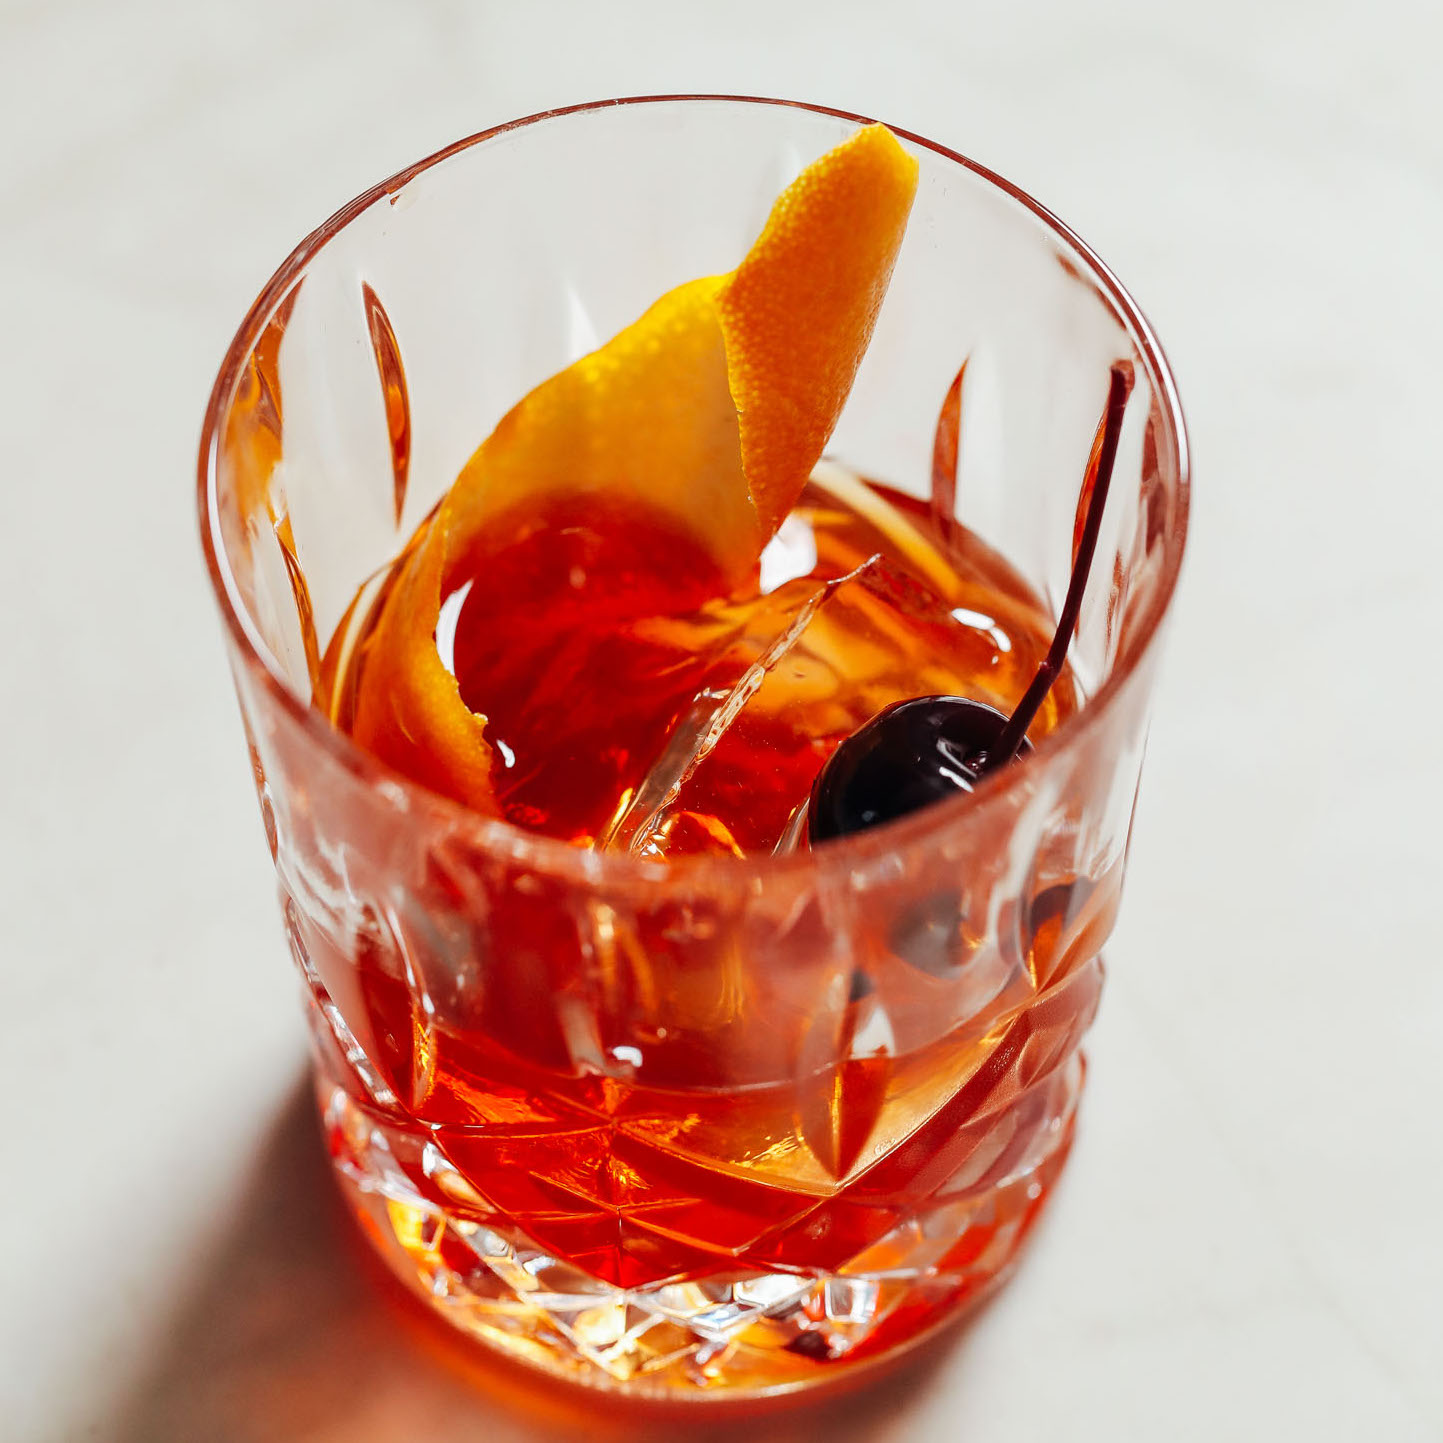 Best Classic Old Fashioned Cocktail — Zestful Kitchen